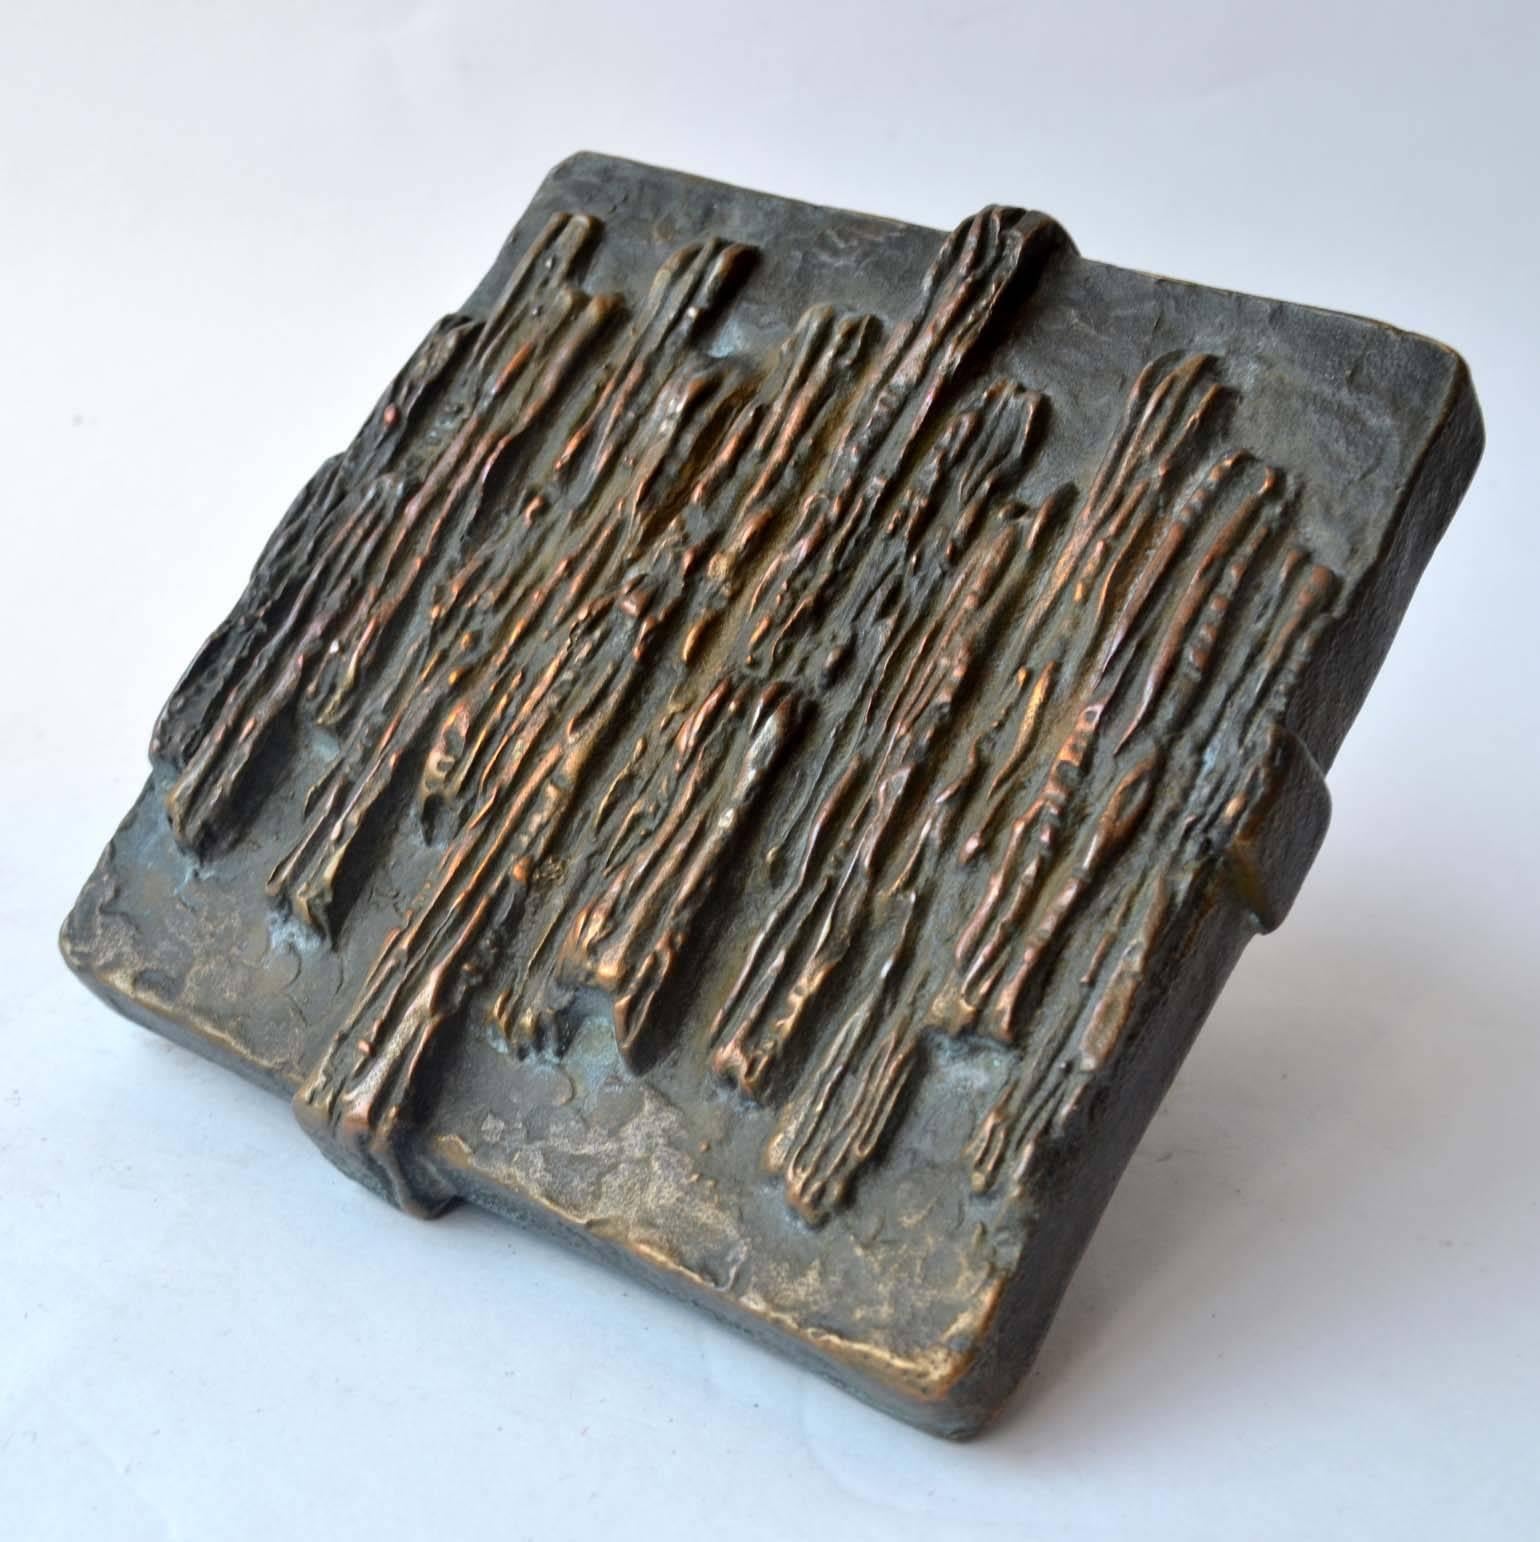 Square artistic bronze cast door handle with a textural relief and dark patina, suitable for doors push and pull doors.
Weight ca.2 kg each.